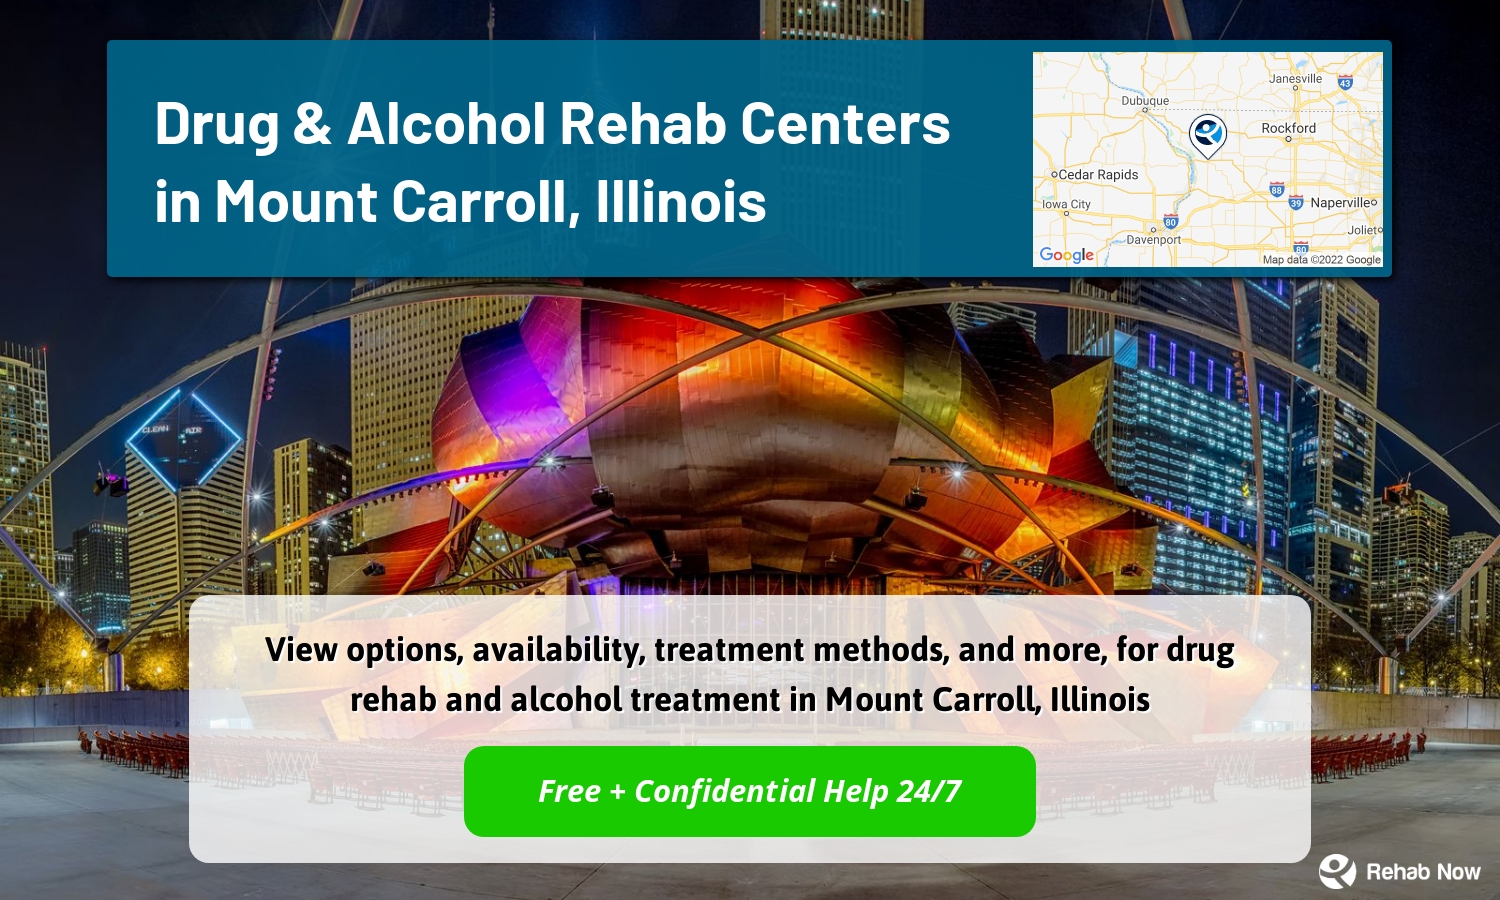 View options, availability, treatment methods, and more, for drug rehab and alcohol treatment in Mount Carroll, Illinois